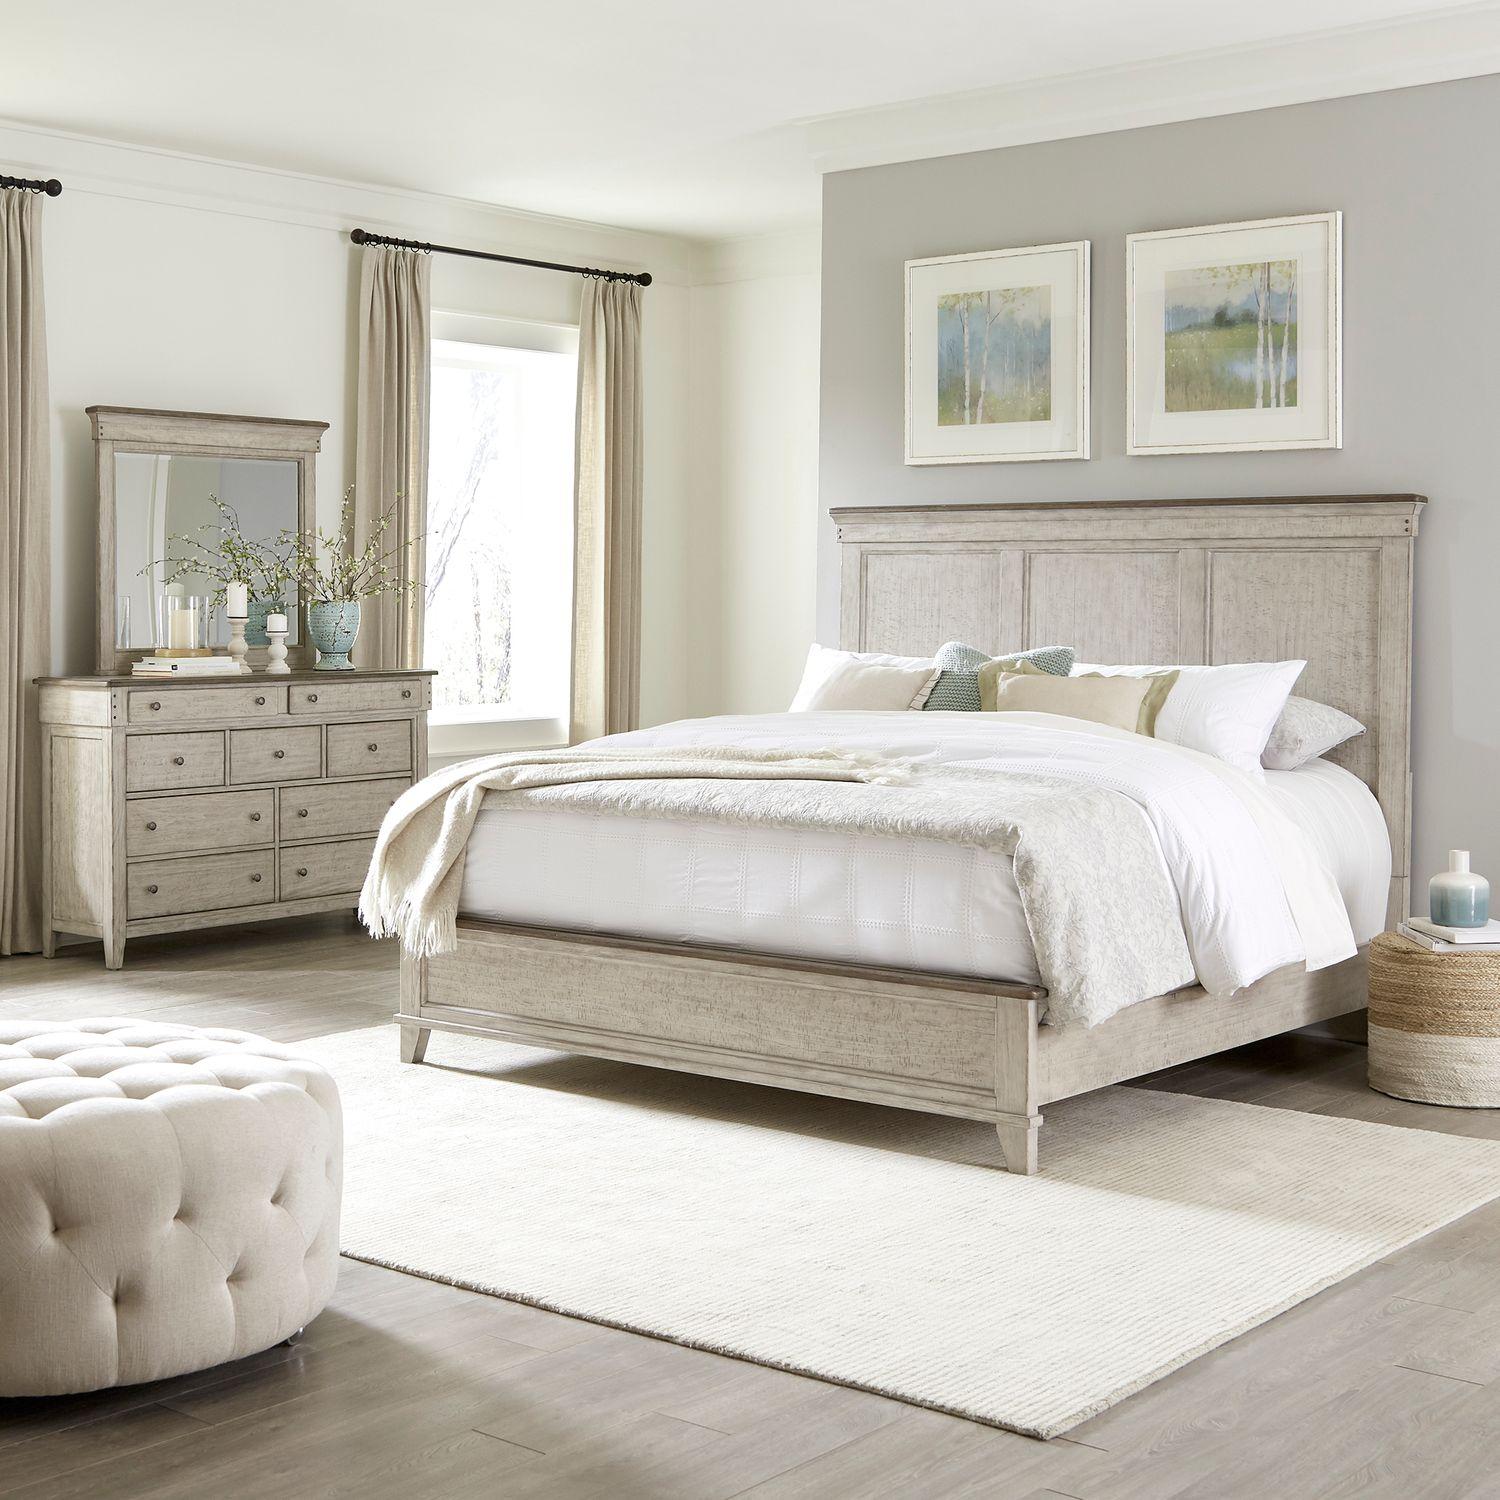 Contemporary, Cottage Panel Bedroom Set Ivy Hollow (457-BR) 457-BR-QPBDM in Taupe 